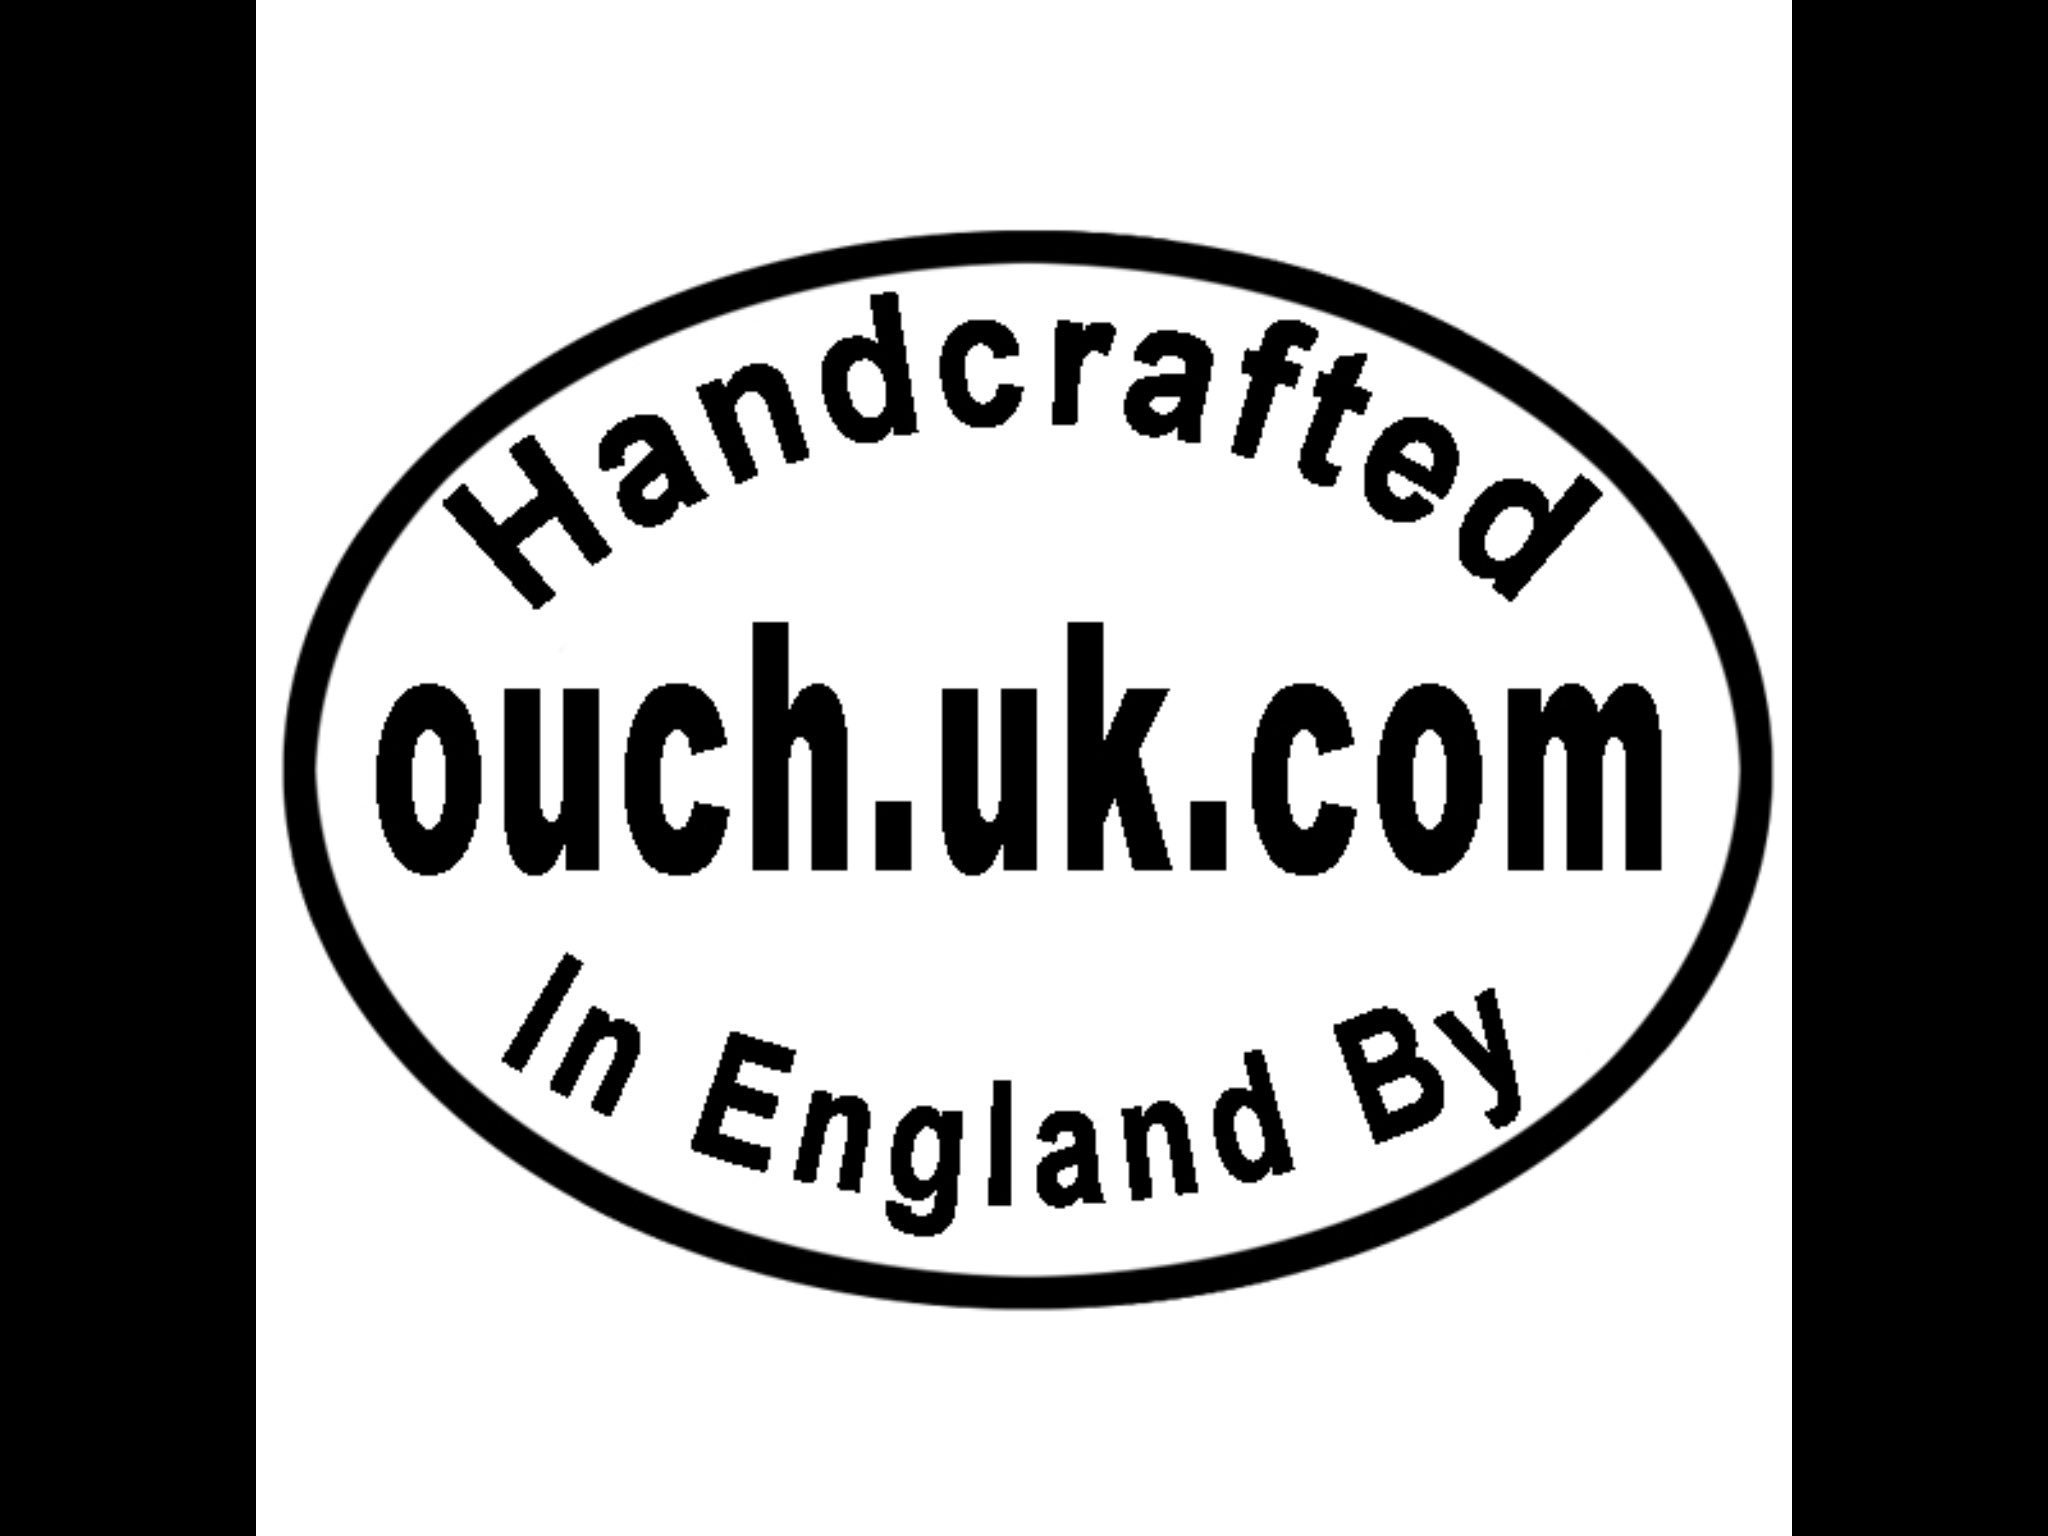 CORRECTION COLLECTION BY OUCH UK